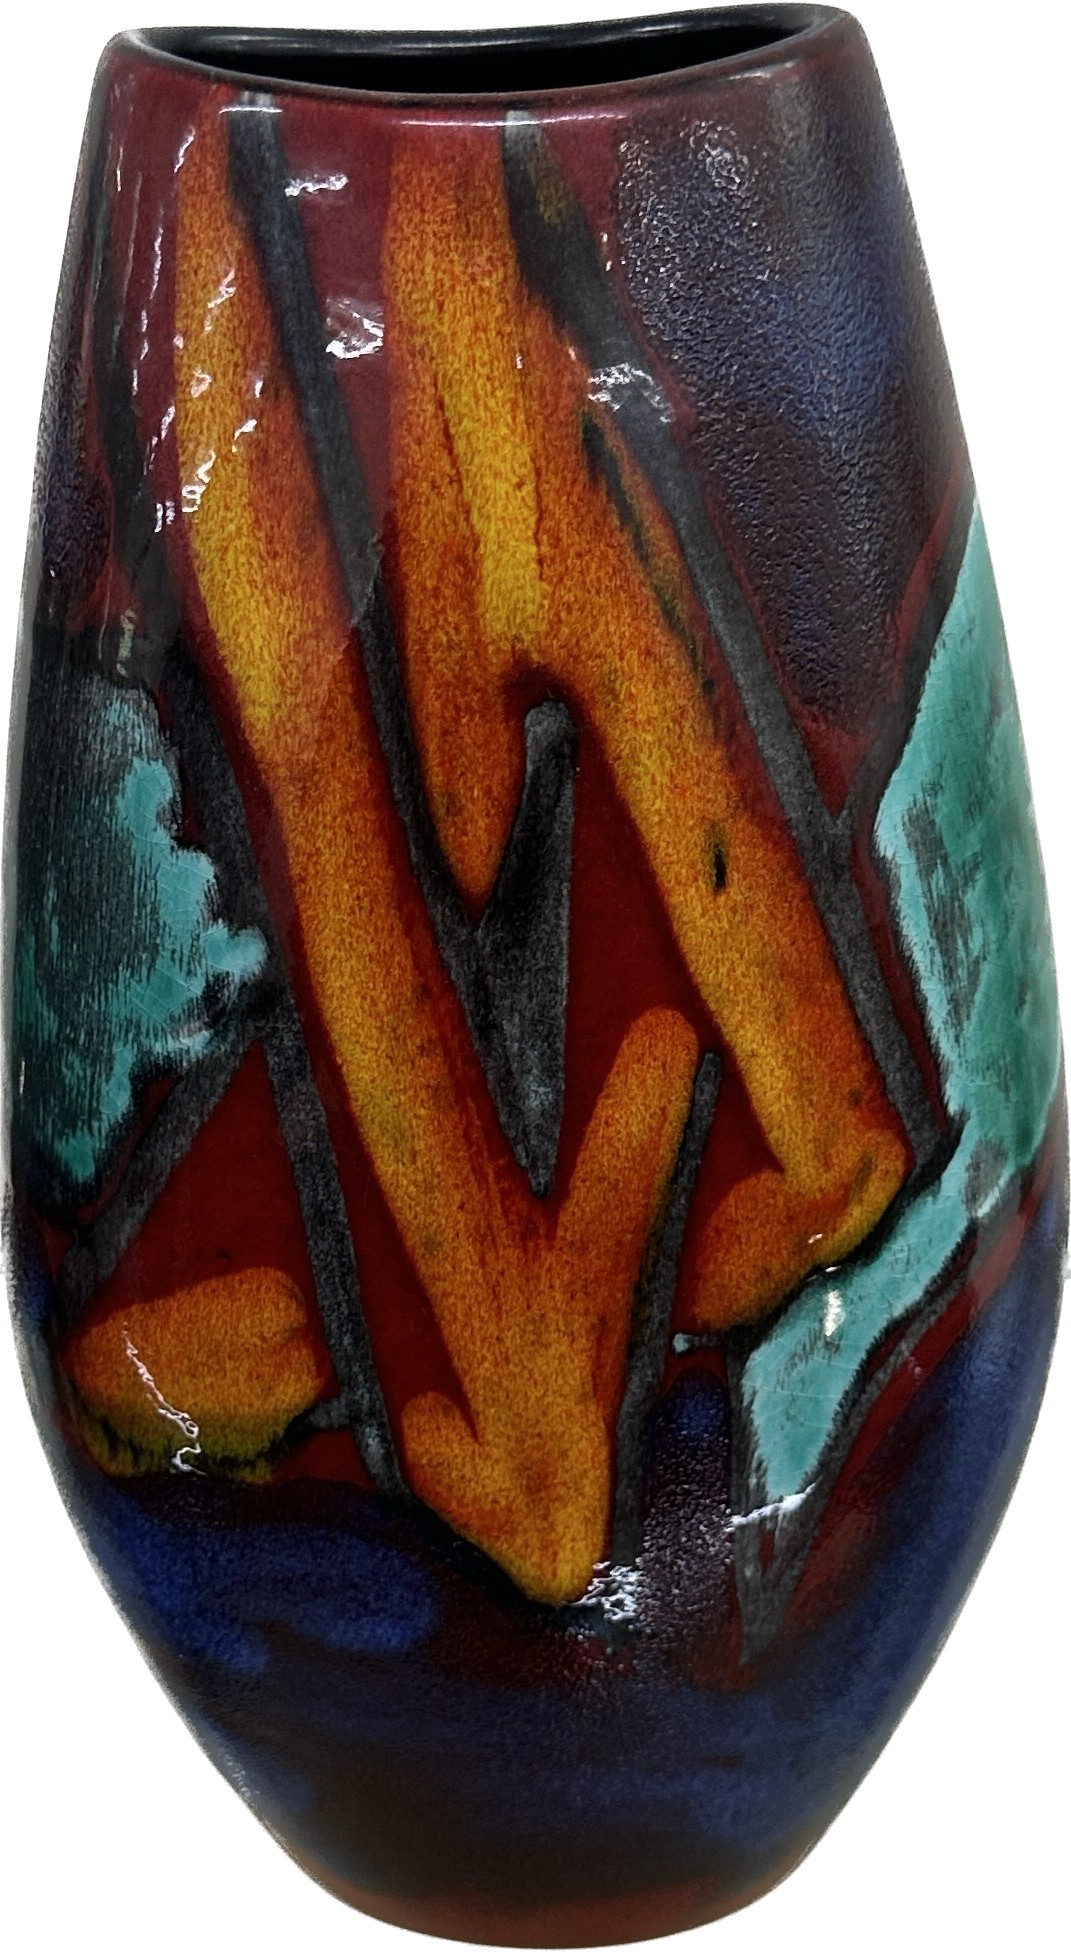 Poole Pottery Graffiti small Manhattan vase, overall height 26cm, good overall condition